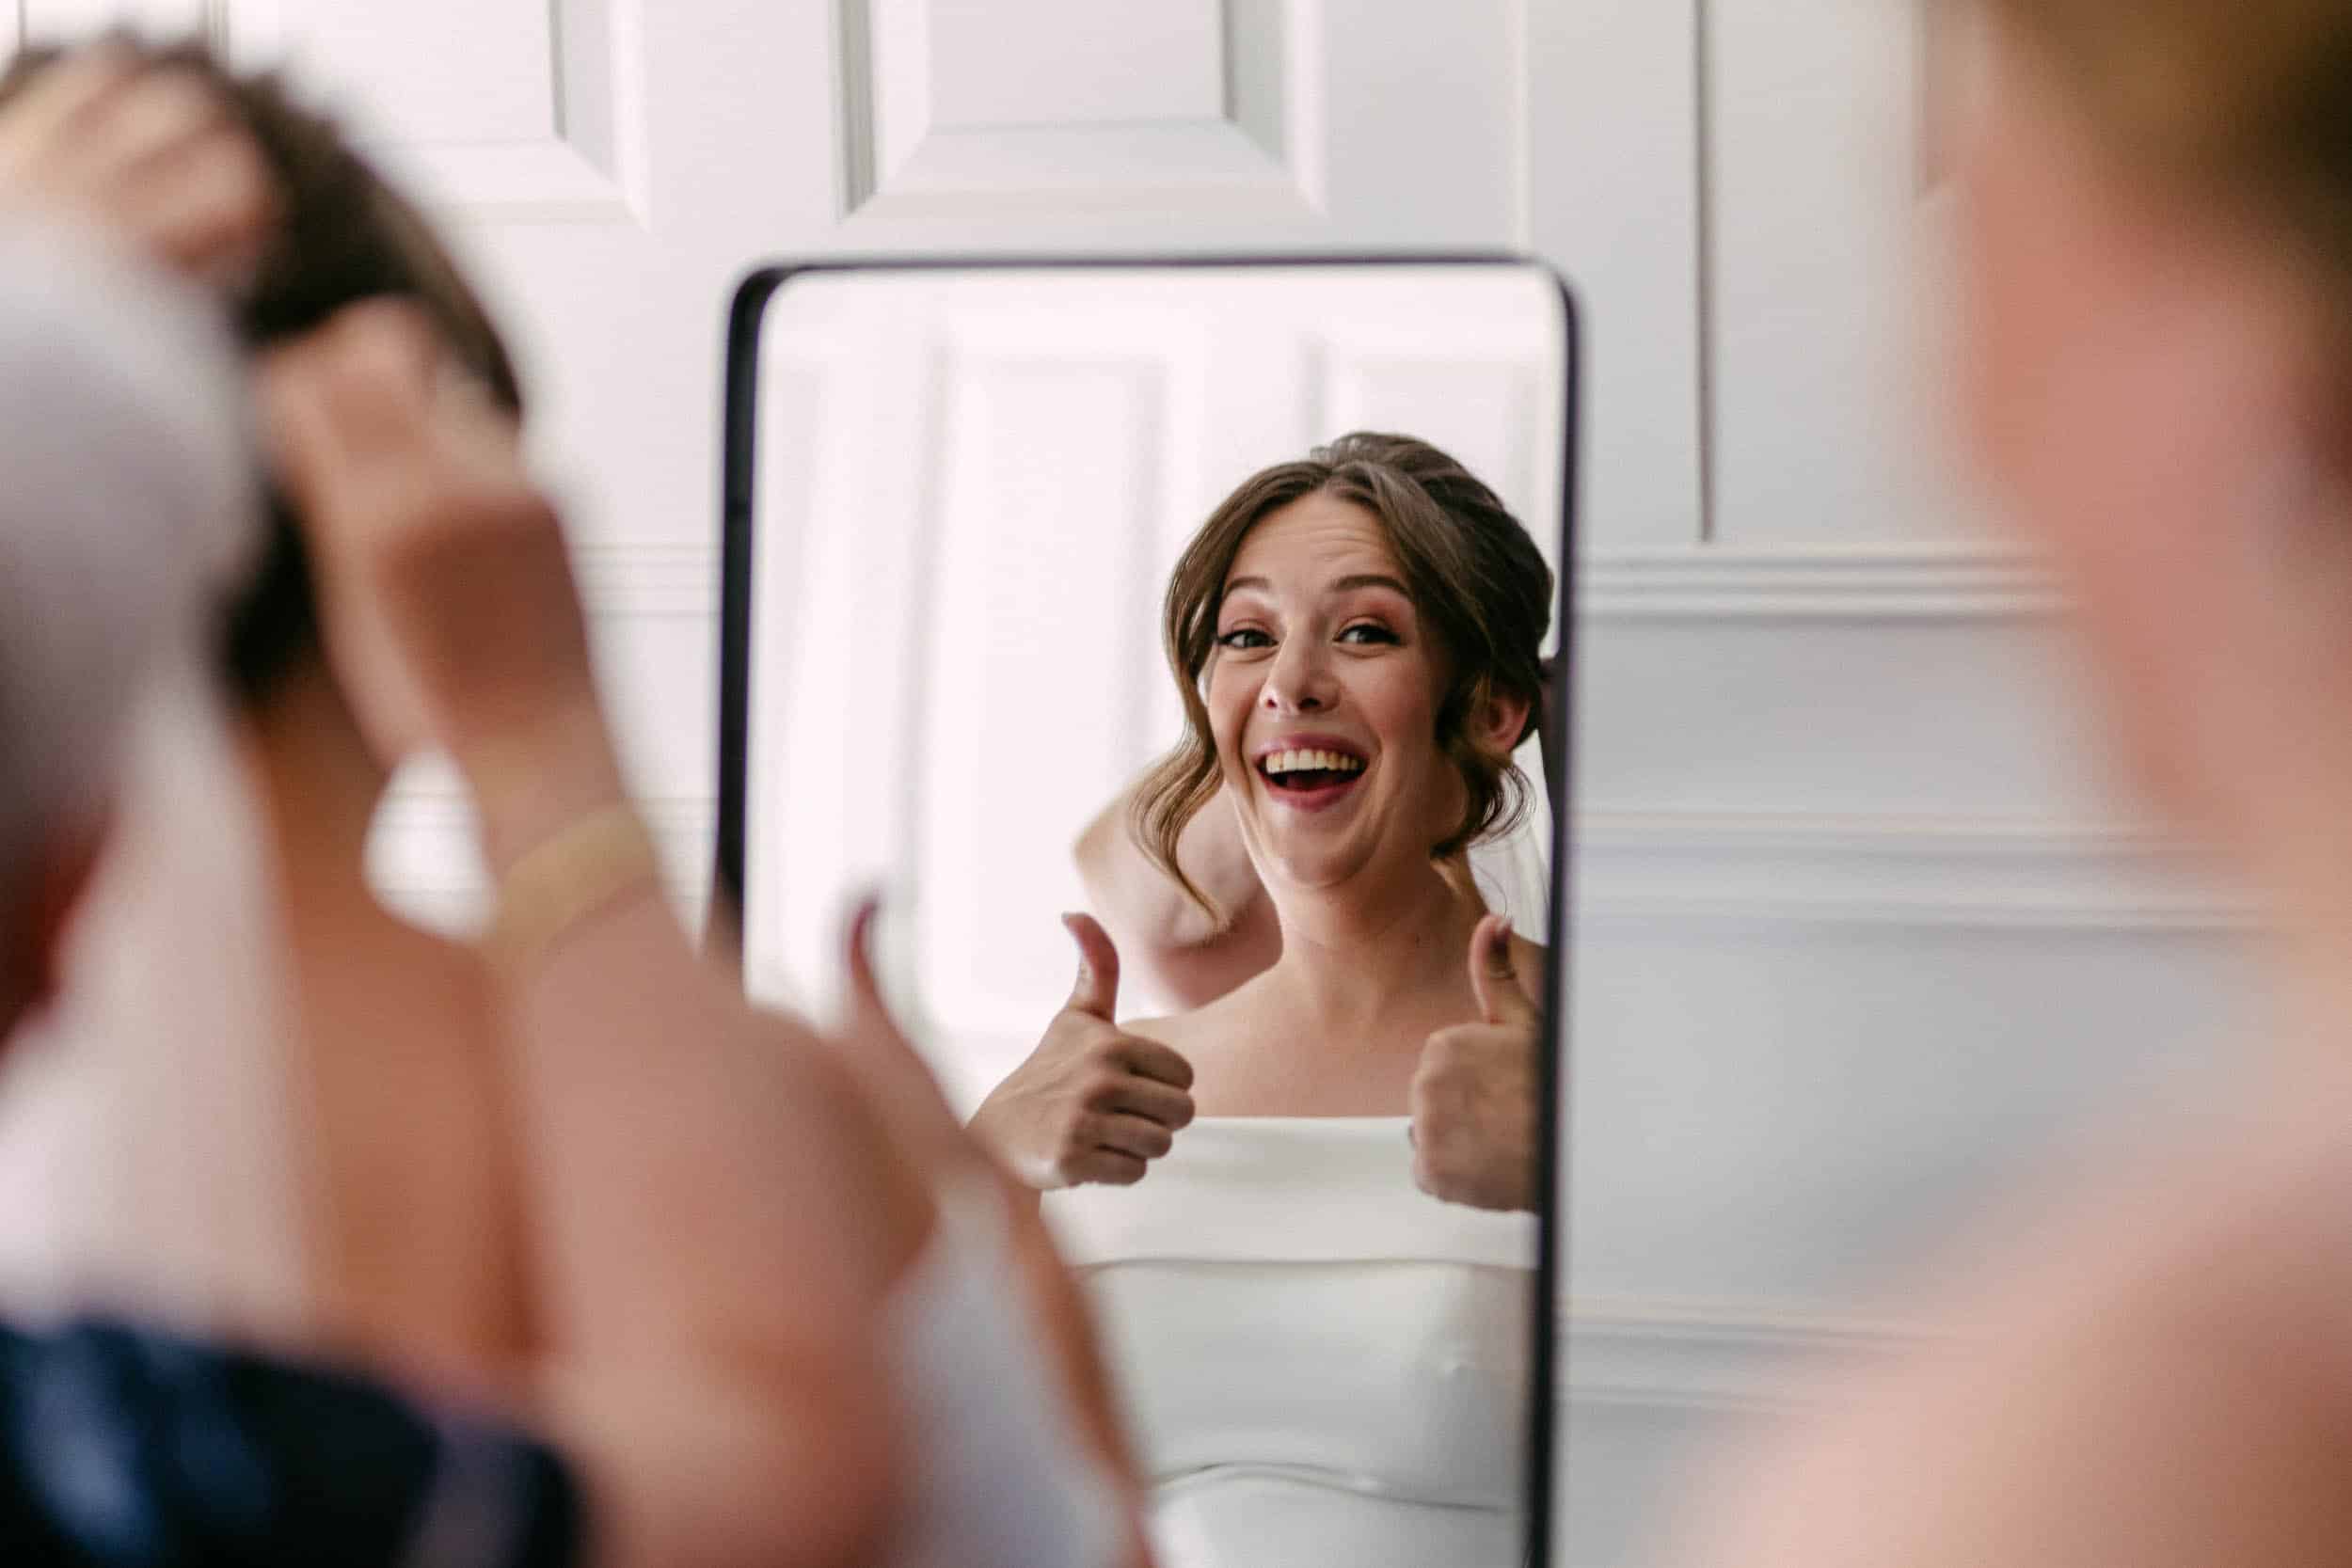 A bride giving a thumbs-up in front of a mirror on her perfect wedding day, captured by the wedding photographer.